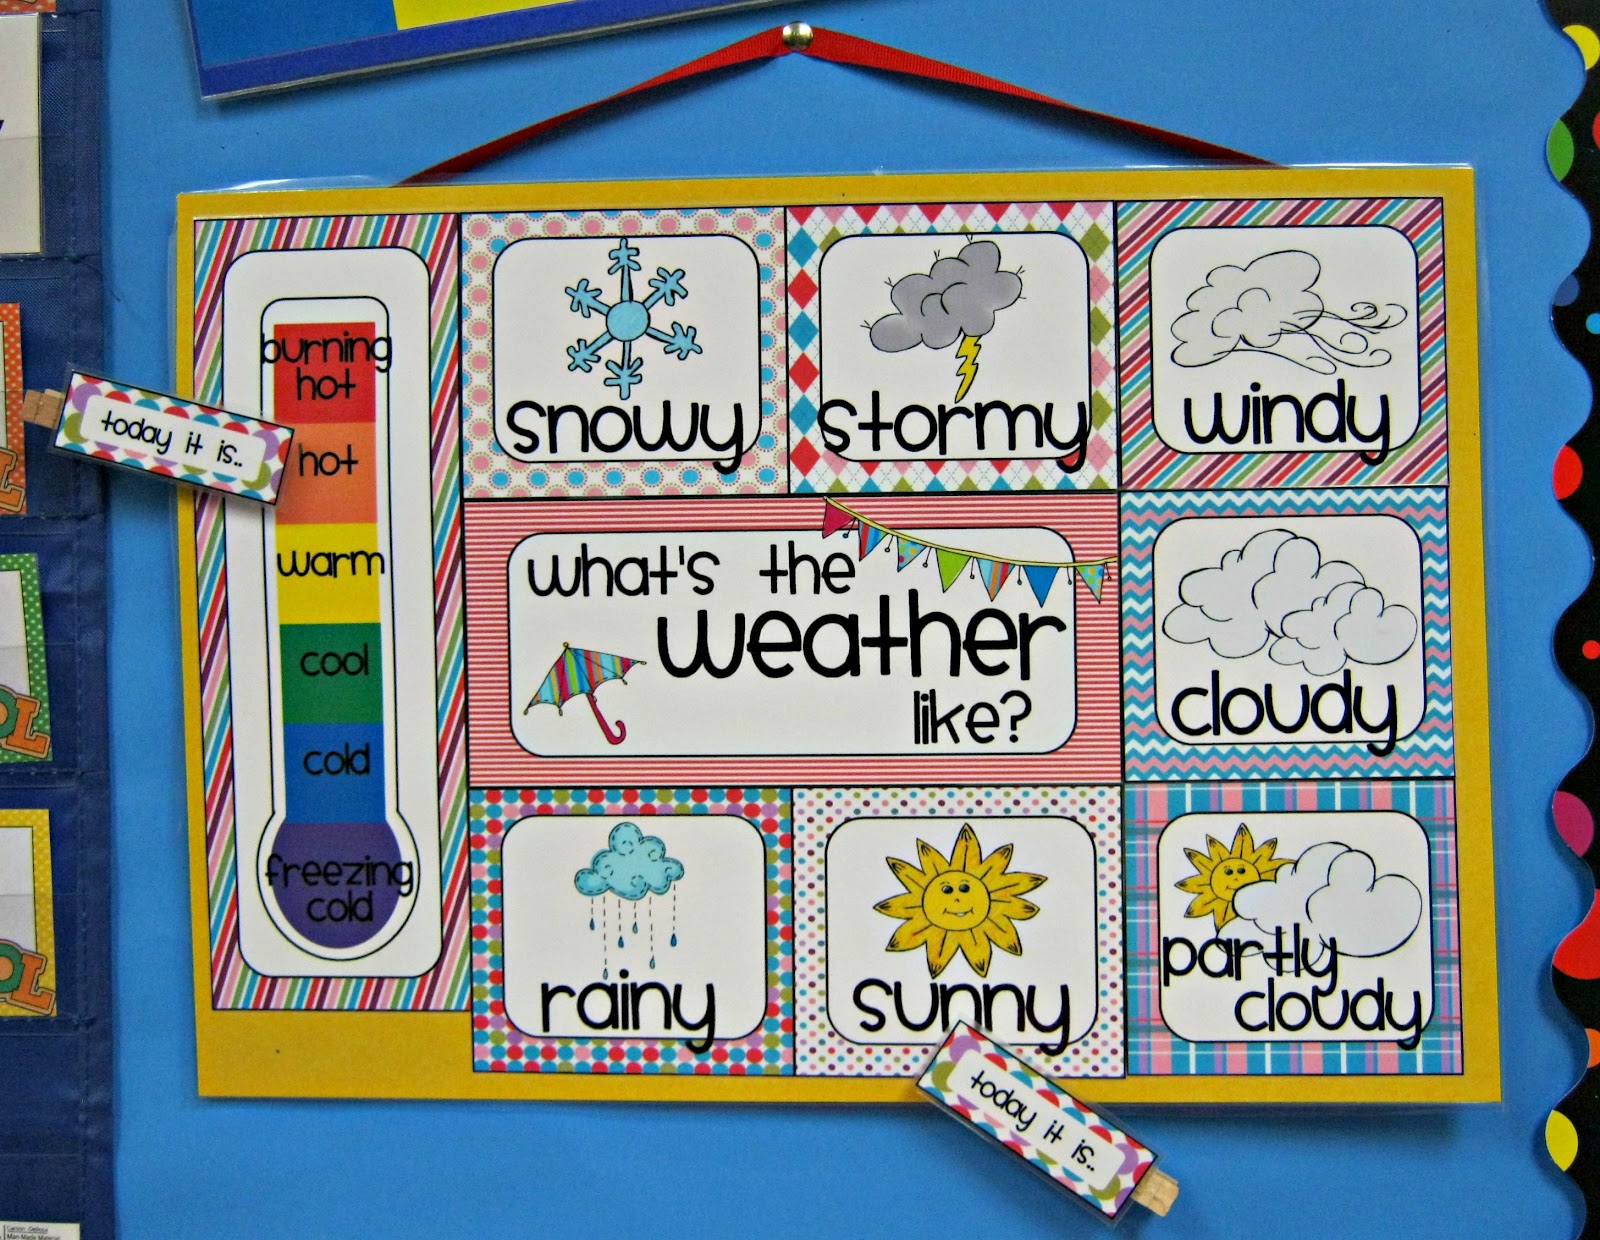 Weather Chart Ideas